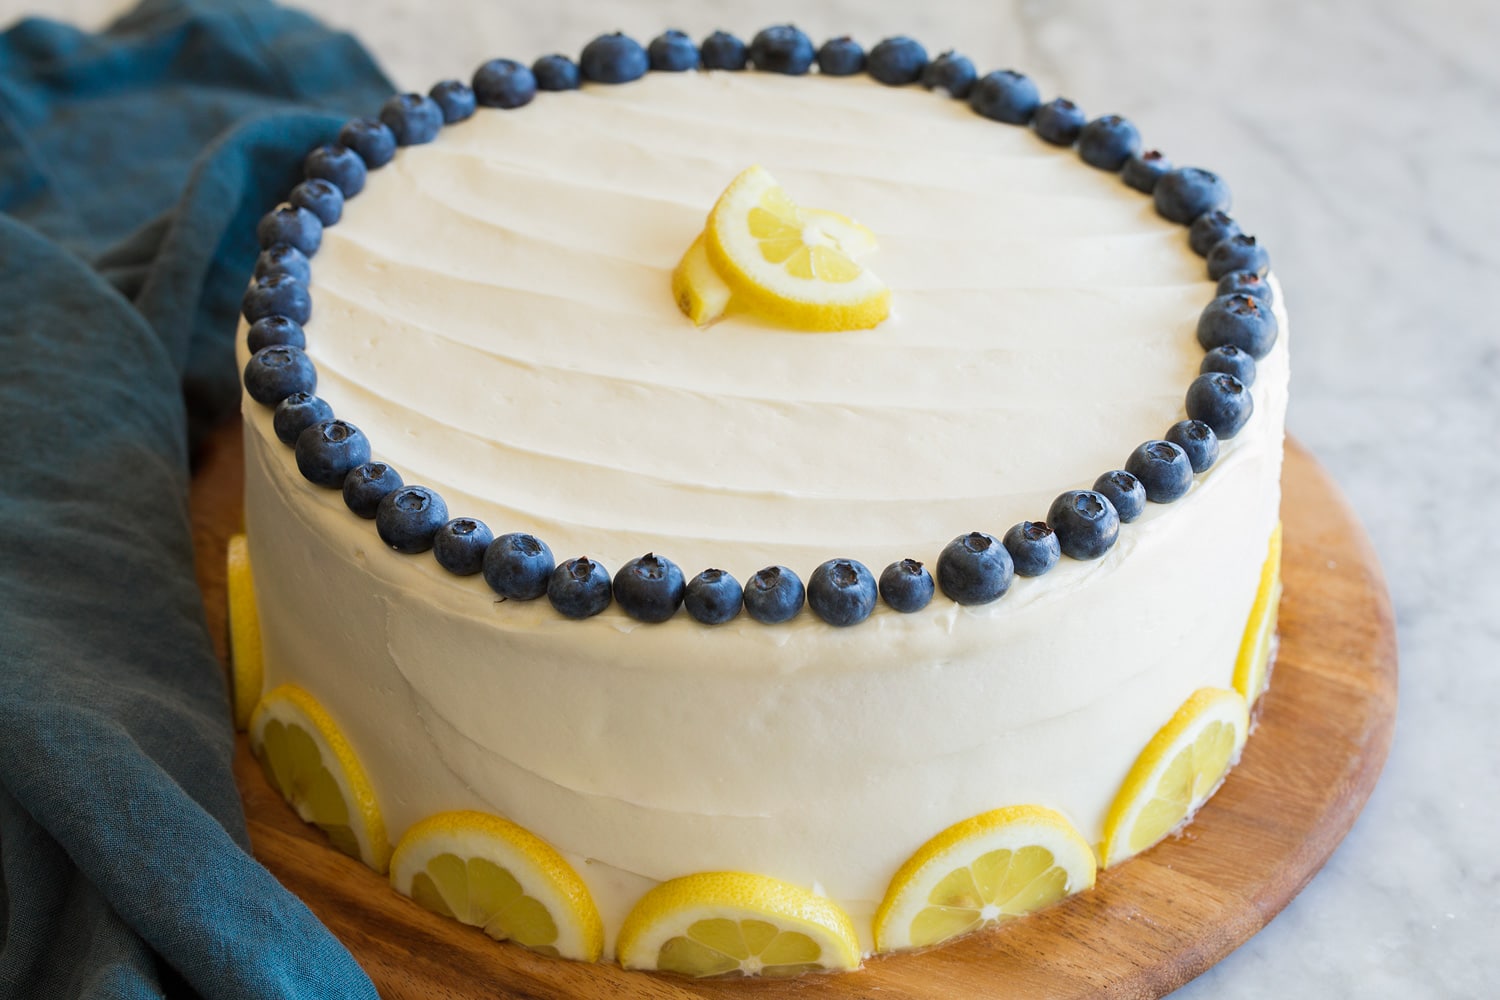 Completed layered lemon and blueberry cake.